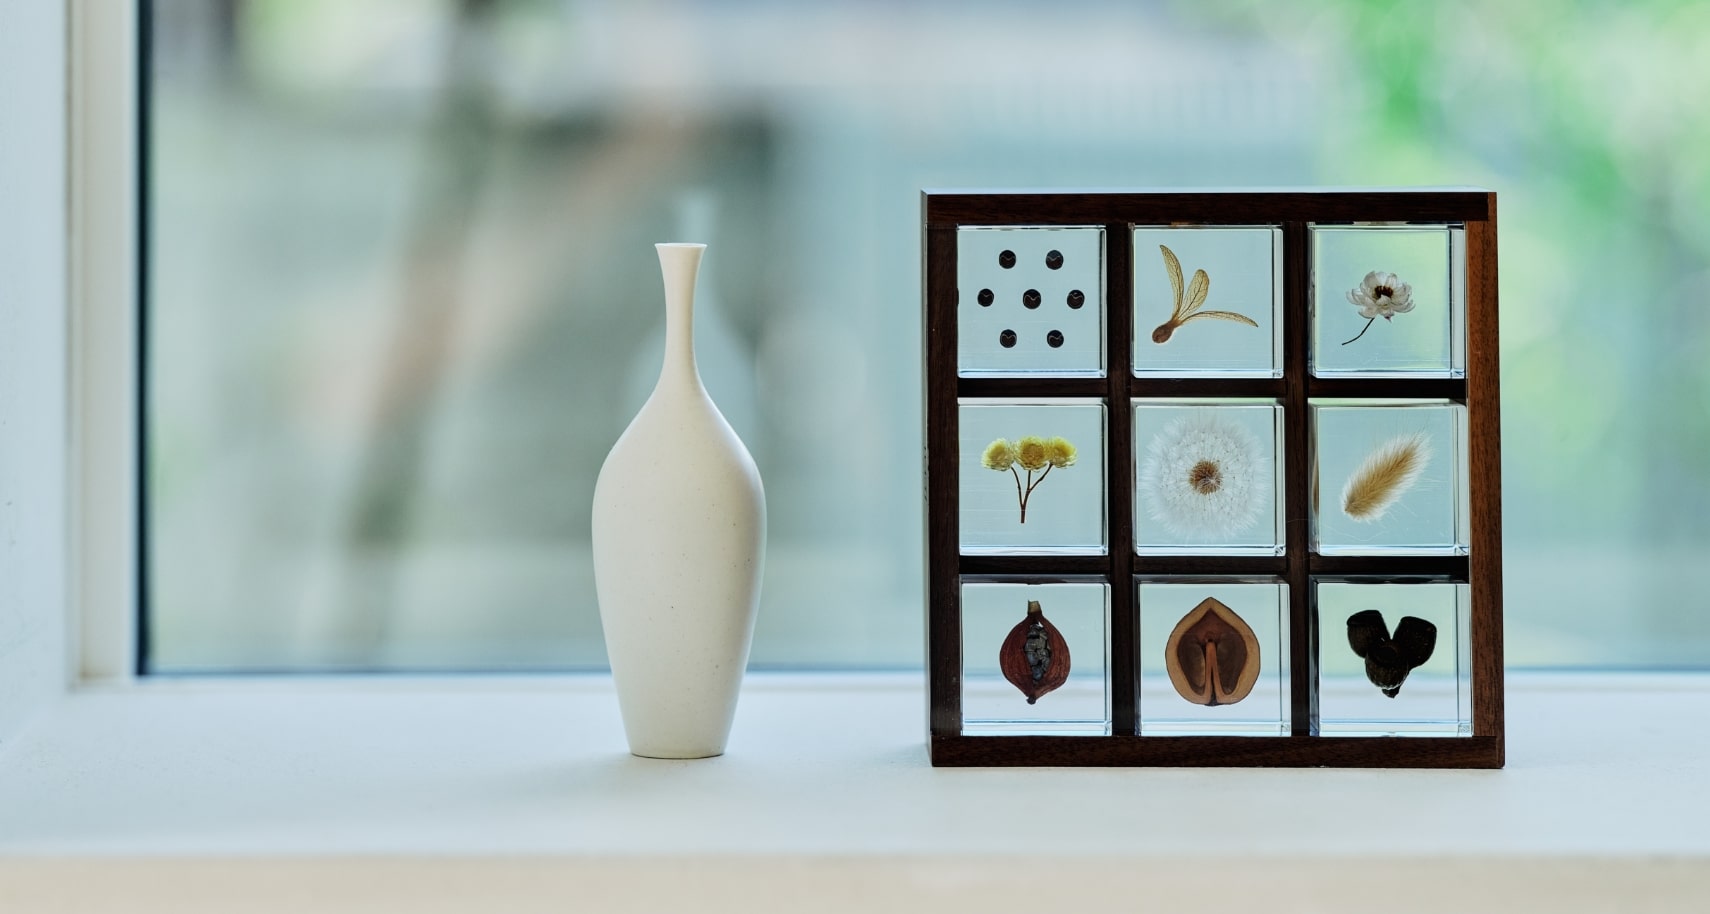 Nine Sola cubes in a storage box placed on a window sill